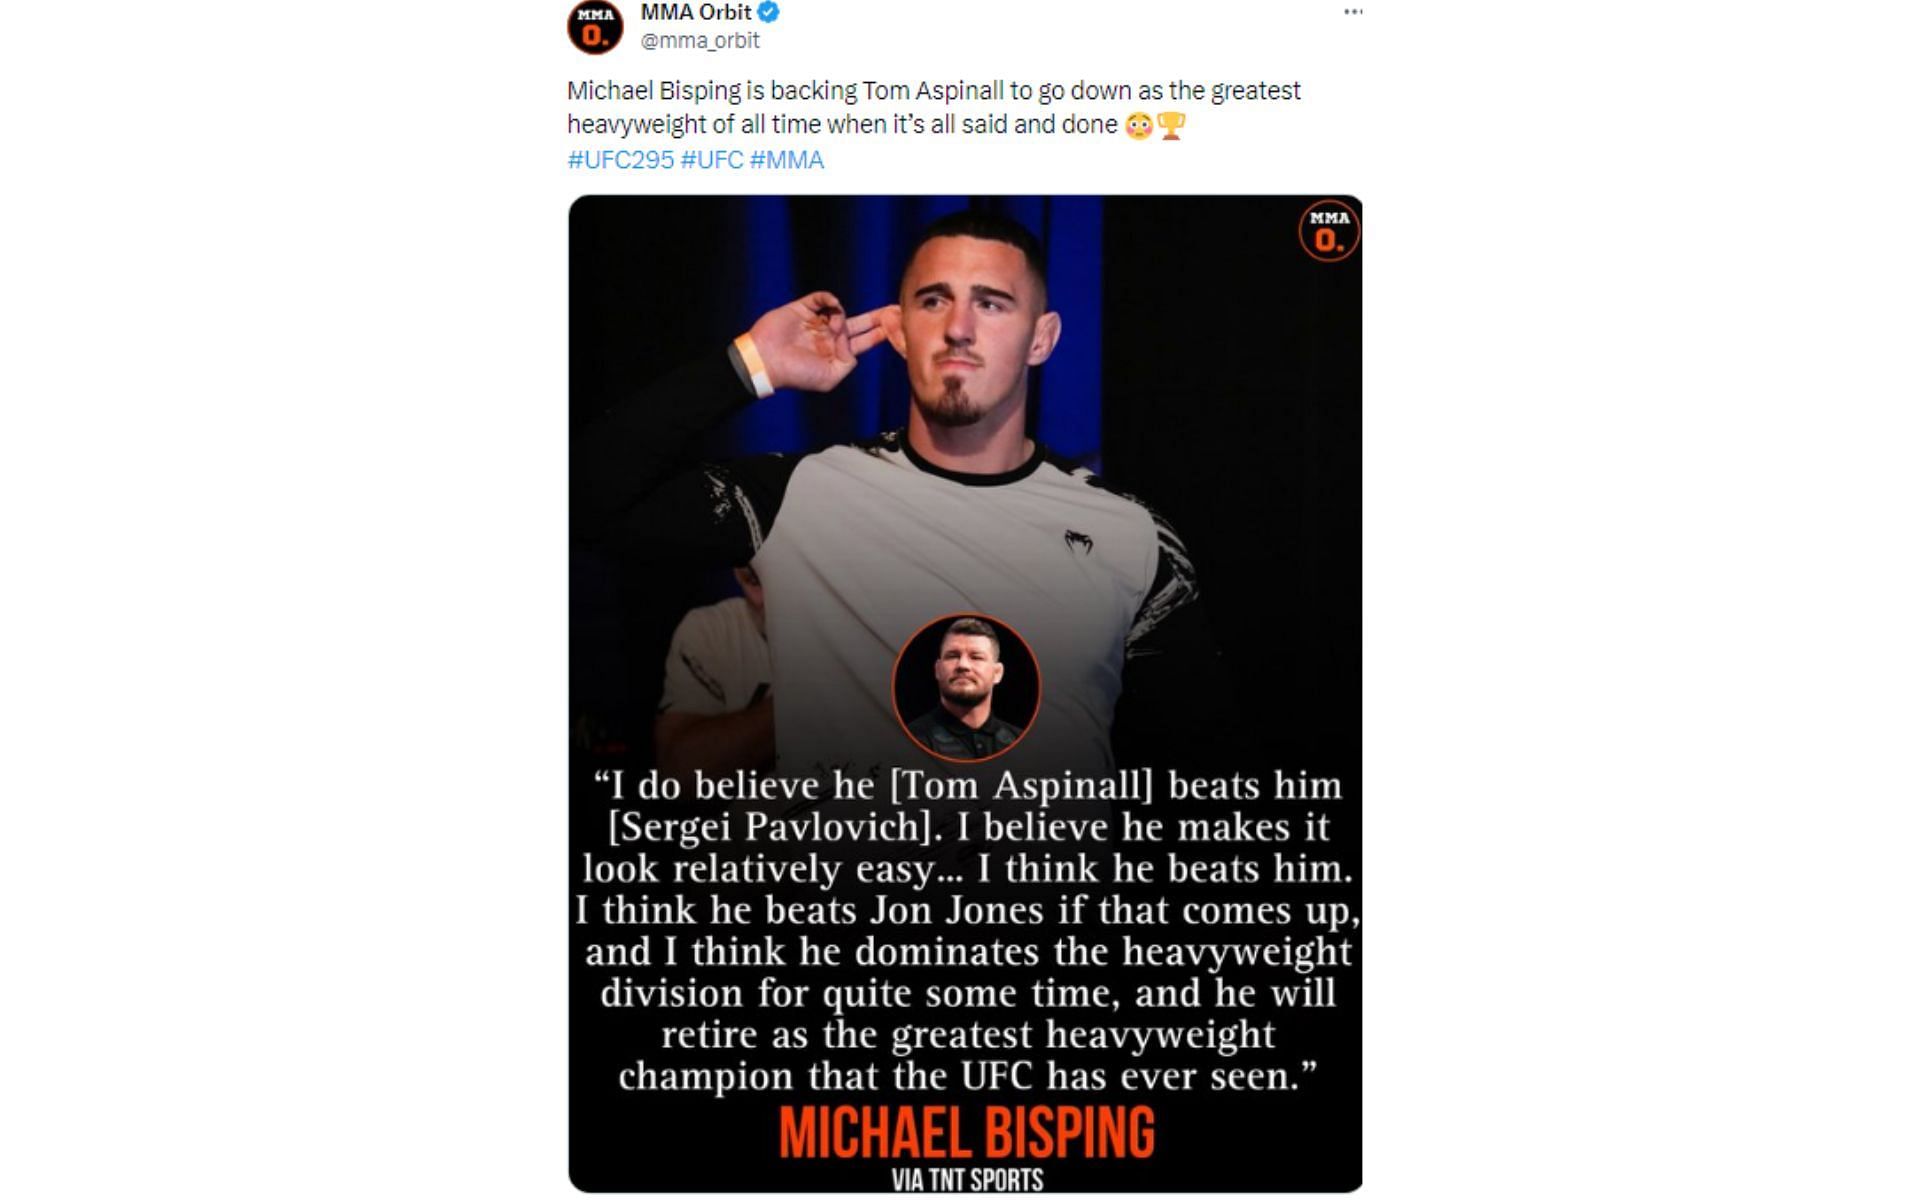 MMA Orbit&#039;s tweet regarding Bisping&#039;s comments about Tom Aspinall